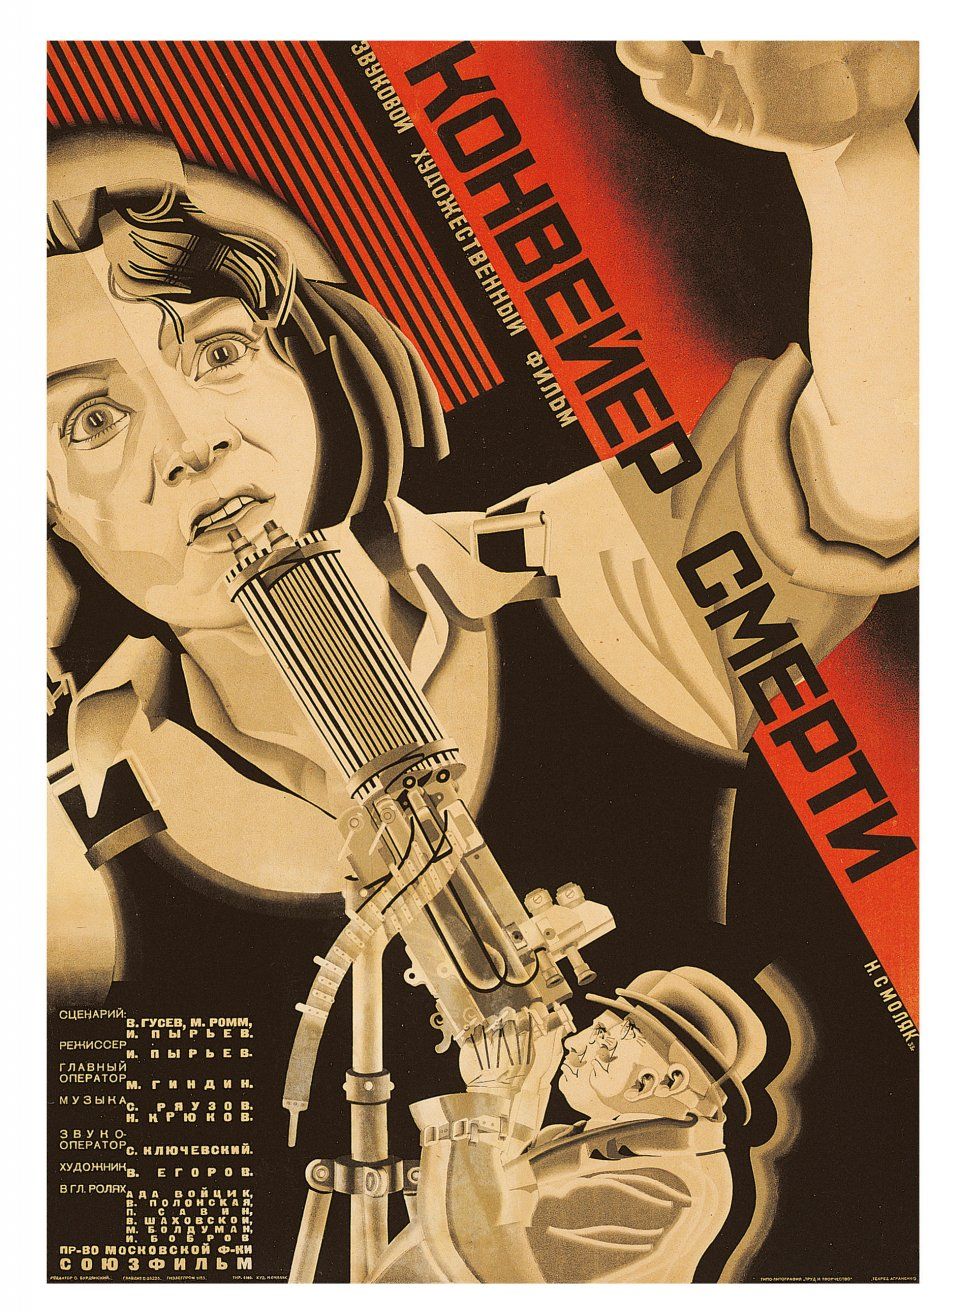 The Film Posters of the Russian Avant-Garde | Open Culture